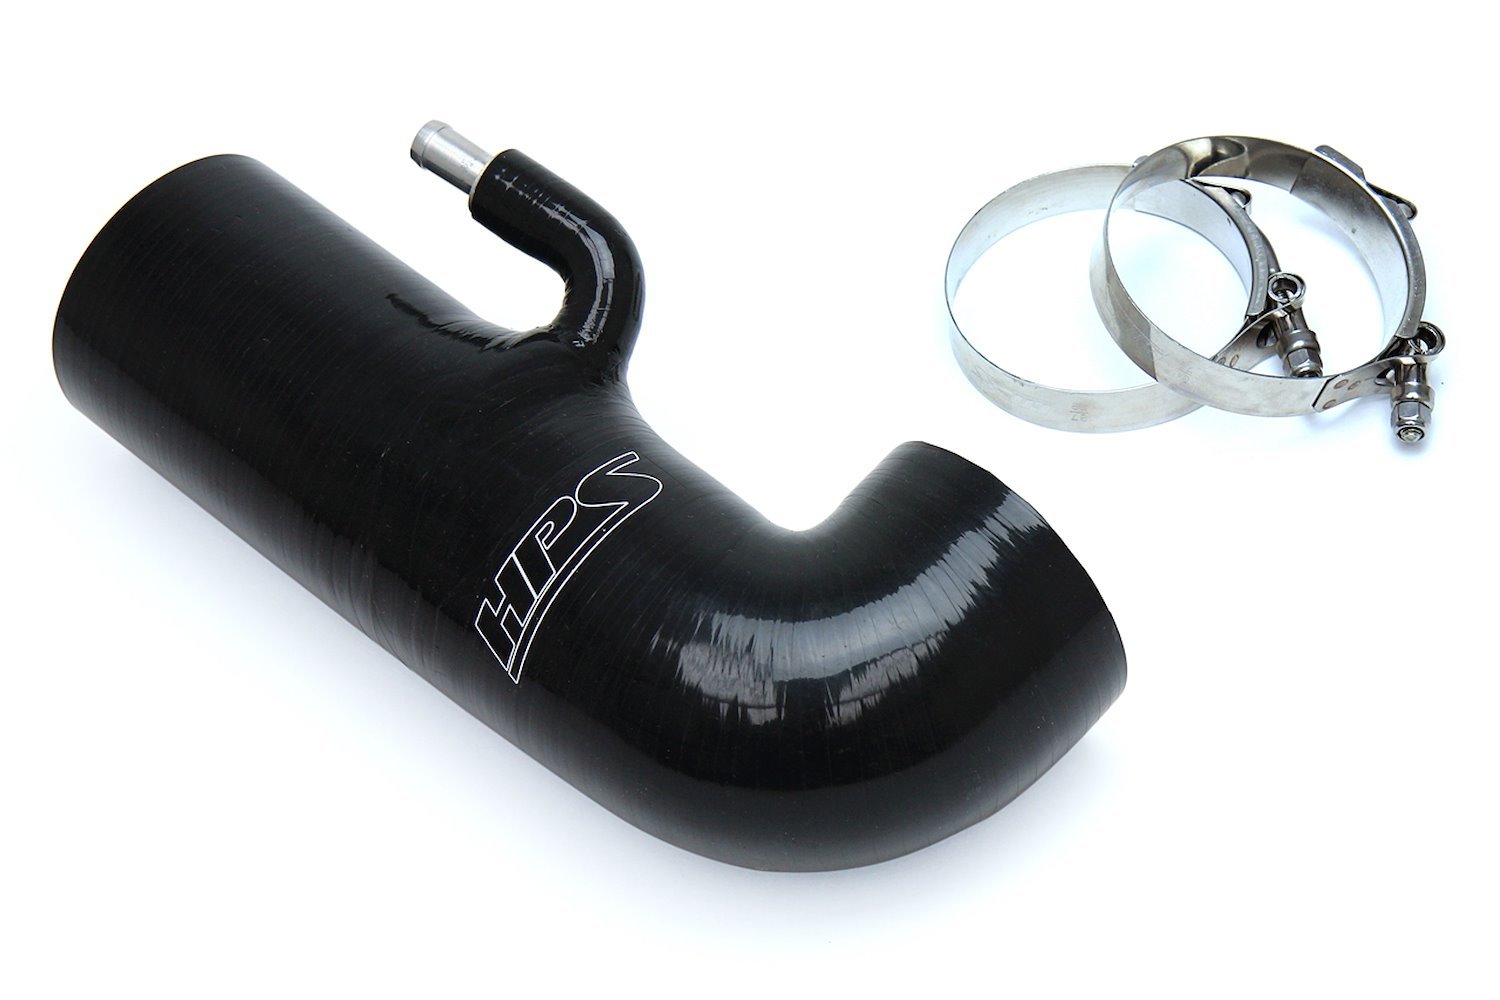 57-1231-BLK Silicone Air Intake, Dyno Proven +1.4 HP, +1.2 TQ, High Air Flow, Better Throttle Response